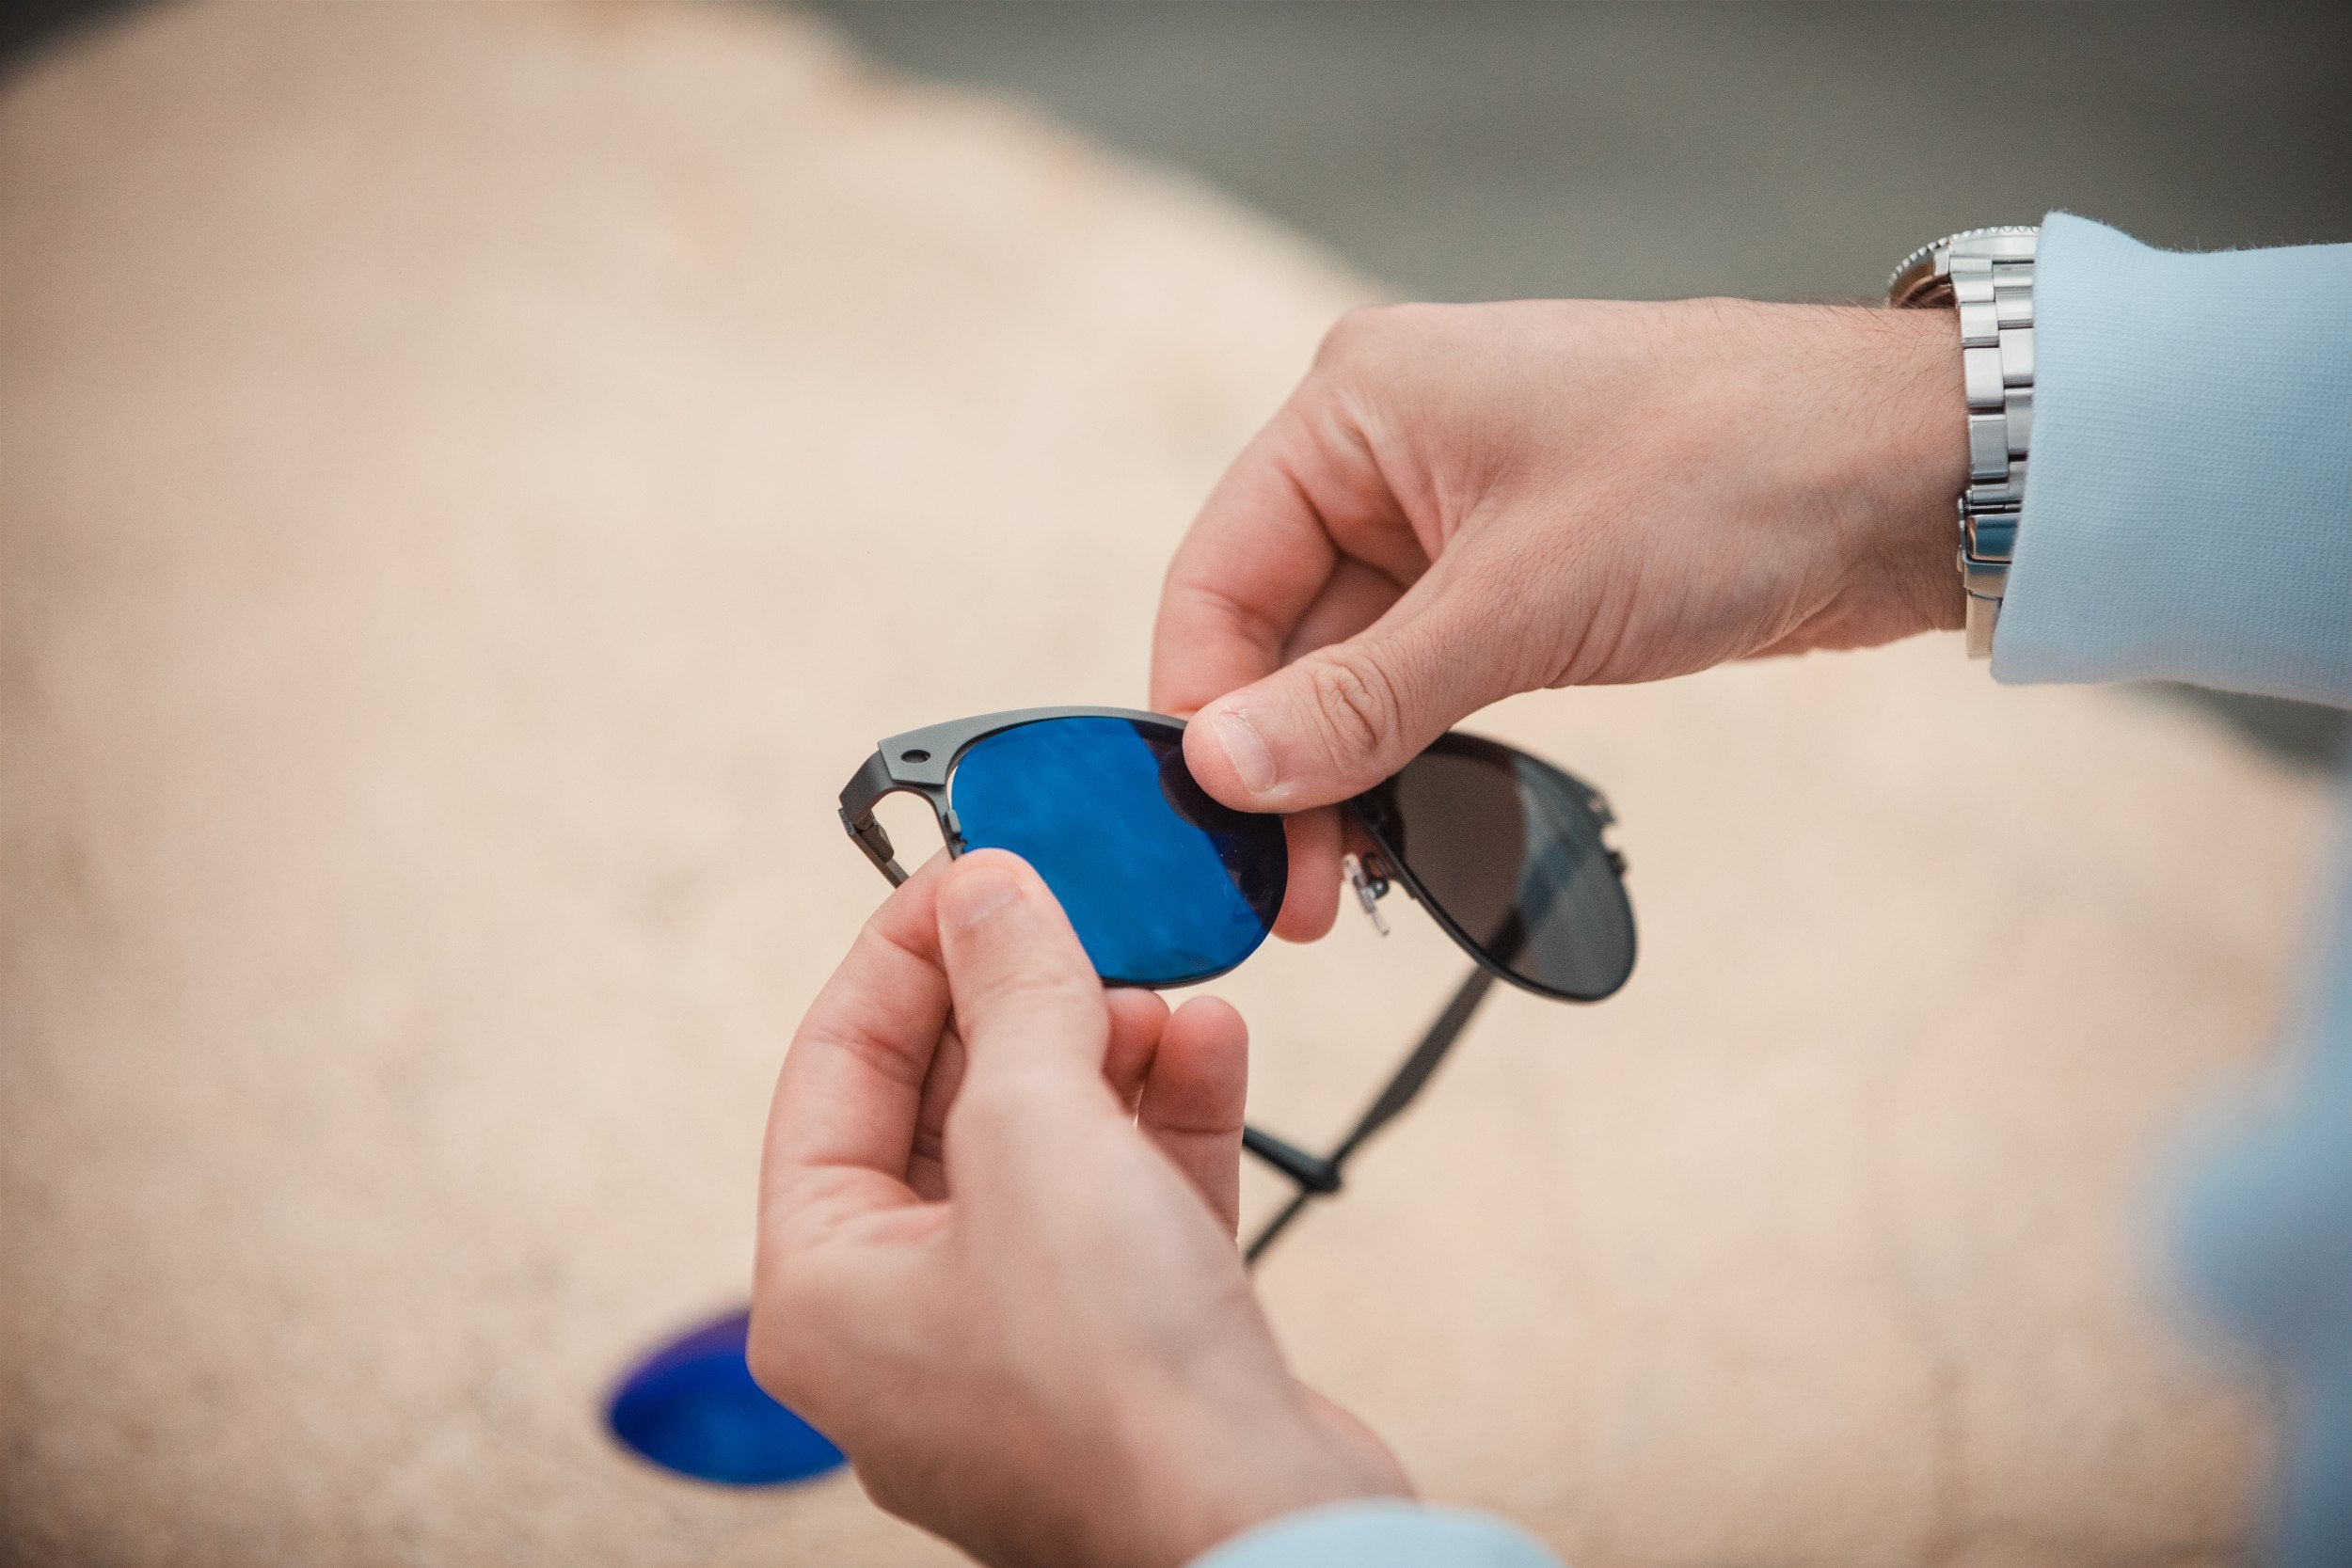 Our Titan series can change lenses between ordinary sunglasses lenses and night driving.